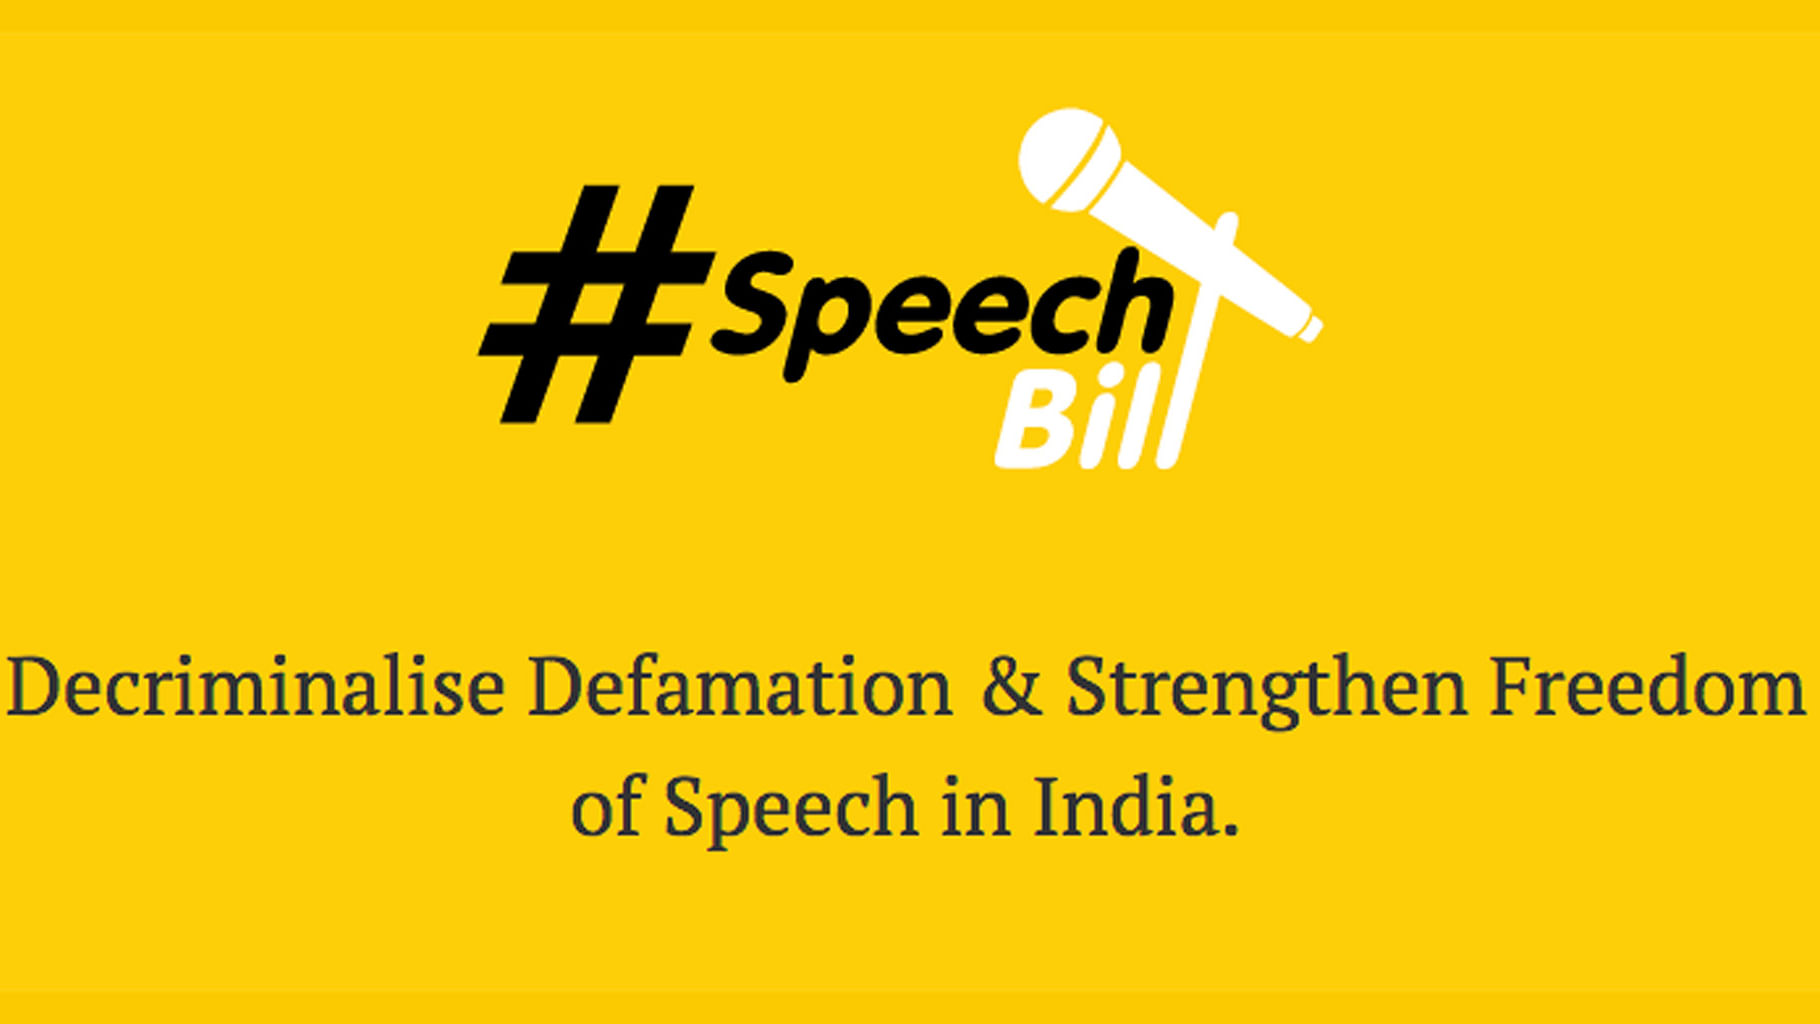 The campaign which was organised by <a href="https://speechbill.in/">SpeechBill.in</a> sought public participation by calling for their comments on the matter. (Photo Courtesy: <a href="https://speechbill.in/">SpeechBill.in</a>)